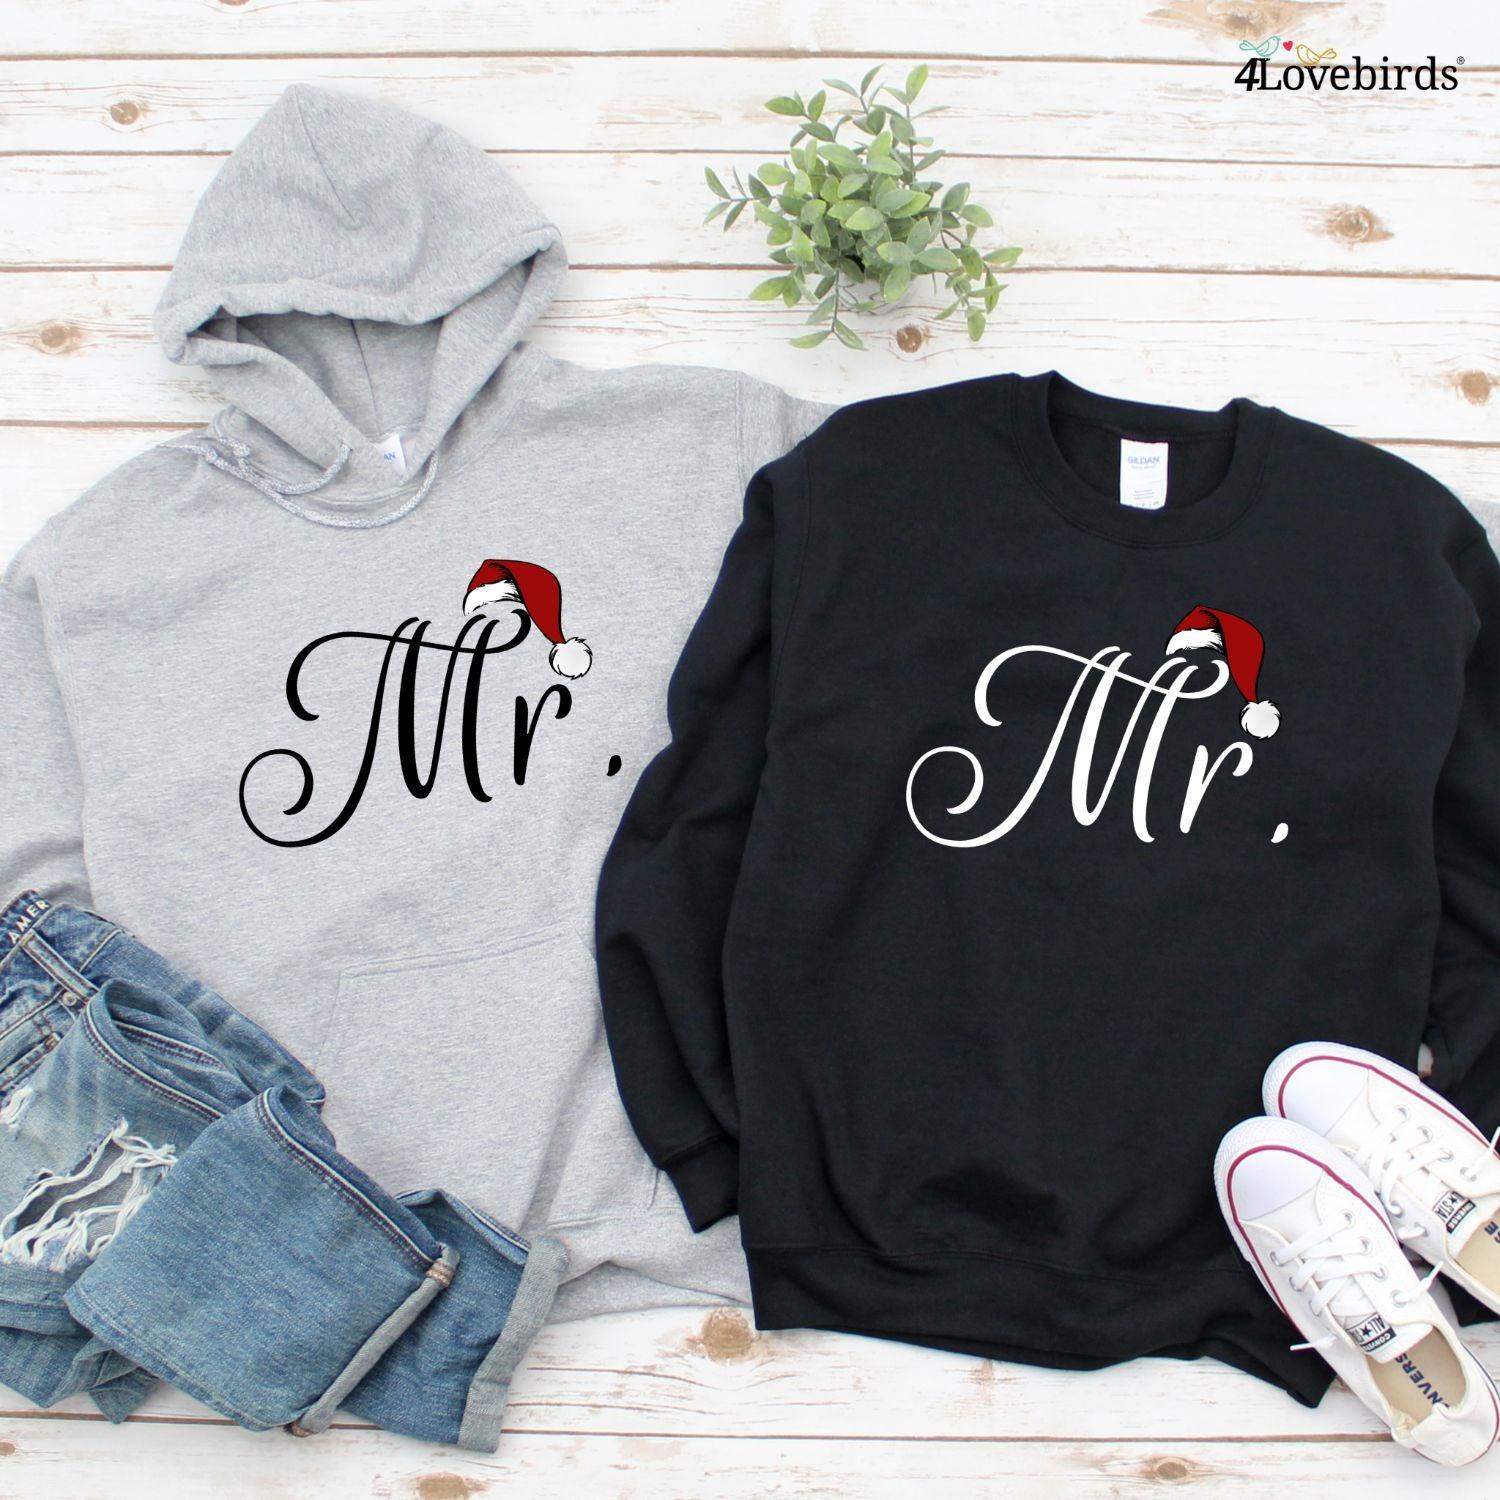 Matching Christmas Set for Couples: Mr & Mrs Gift For Couples - 4Lovebirds